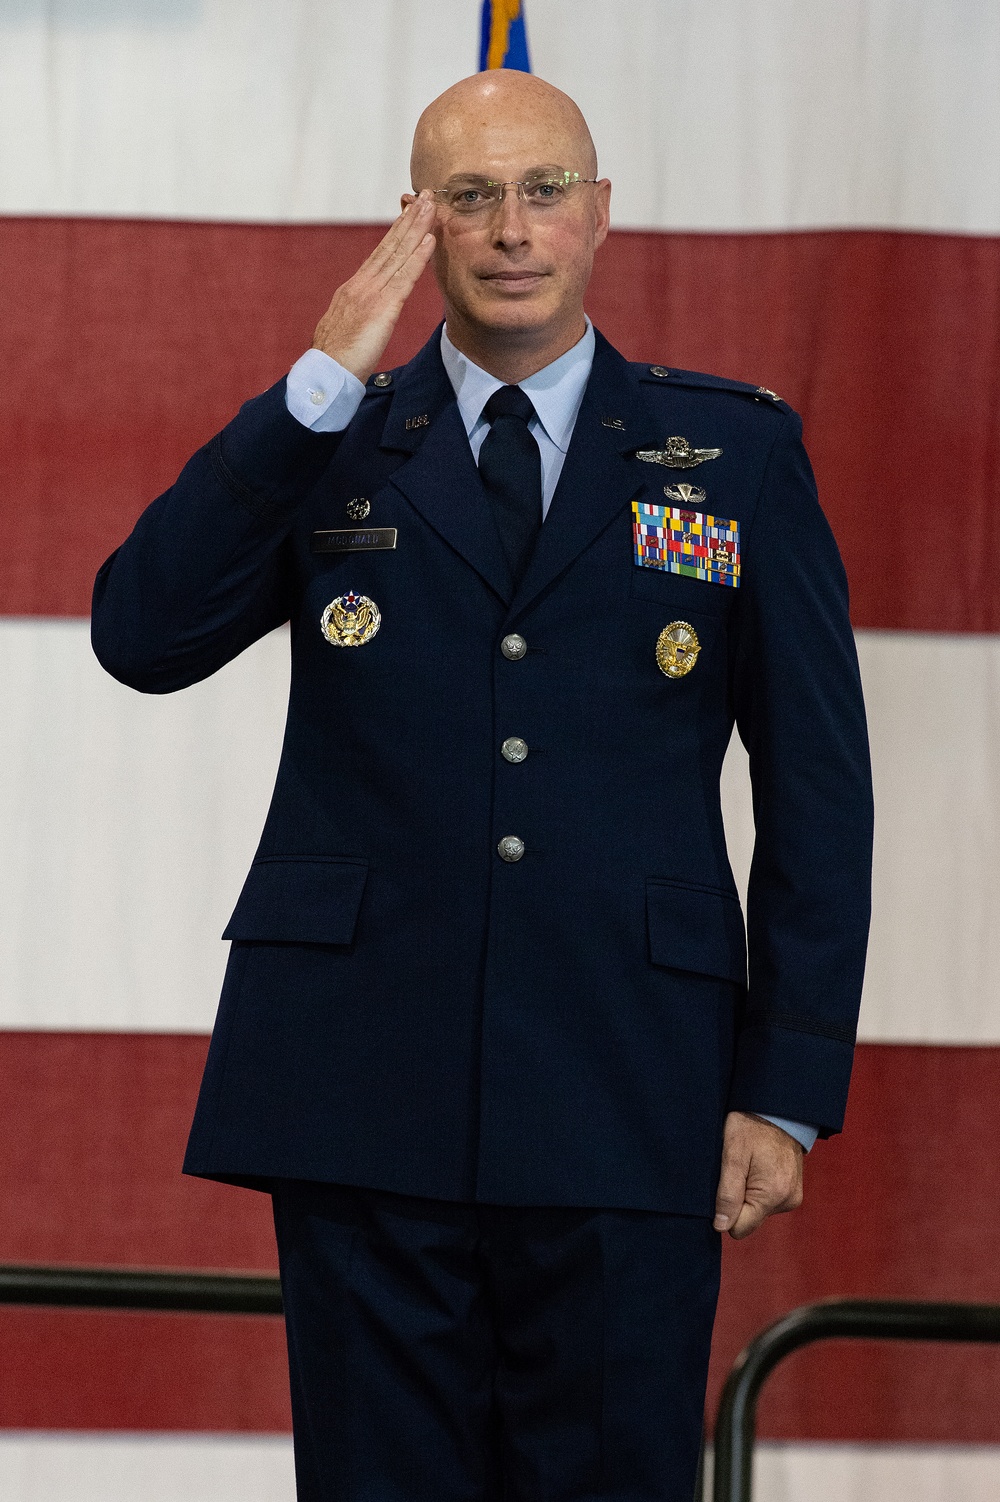 DVIDS - News - McDonald takes command of 436th Airlift Wing